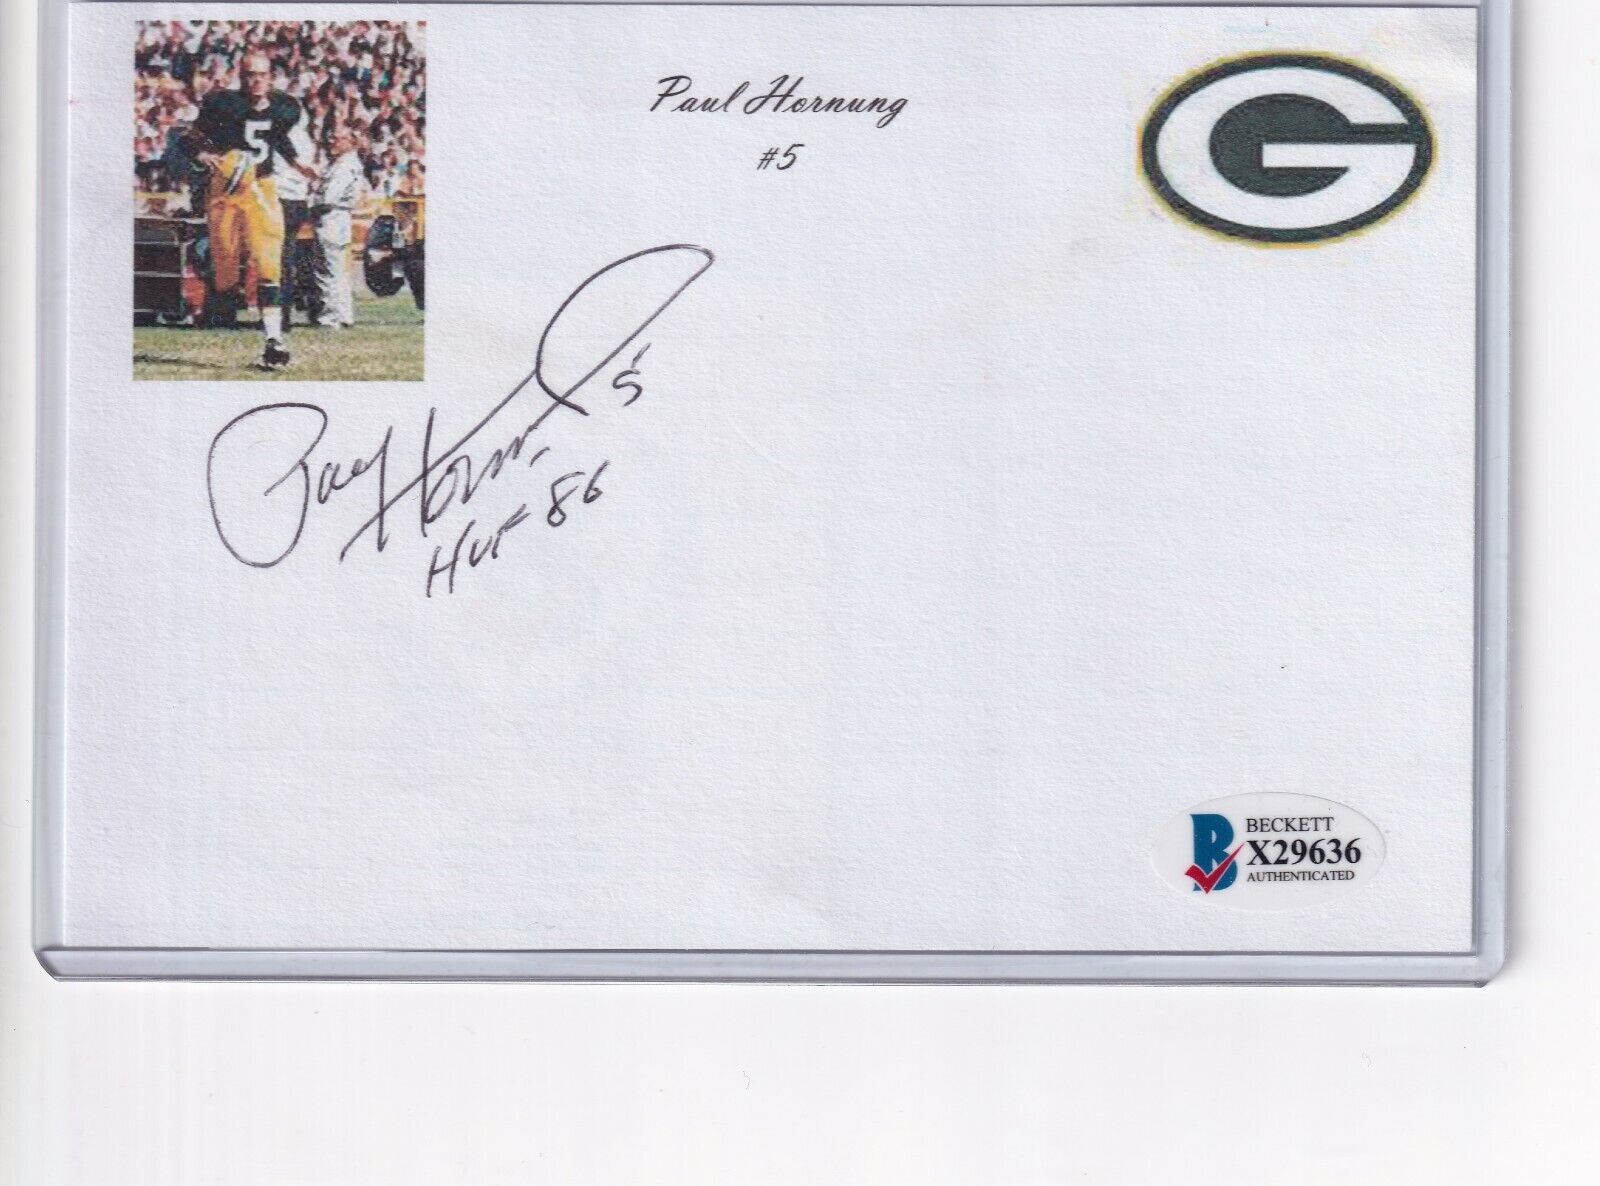 Paul Hornung Autographed Signed 4X6 Index Card With Color Image & Logo Beckett COA